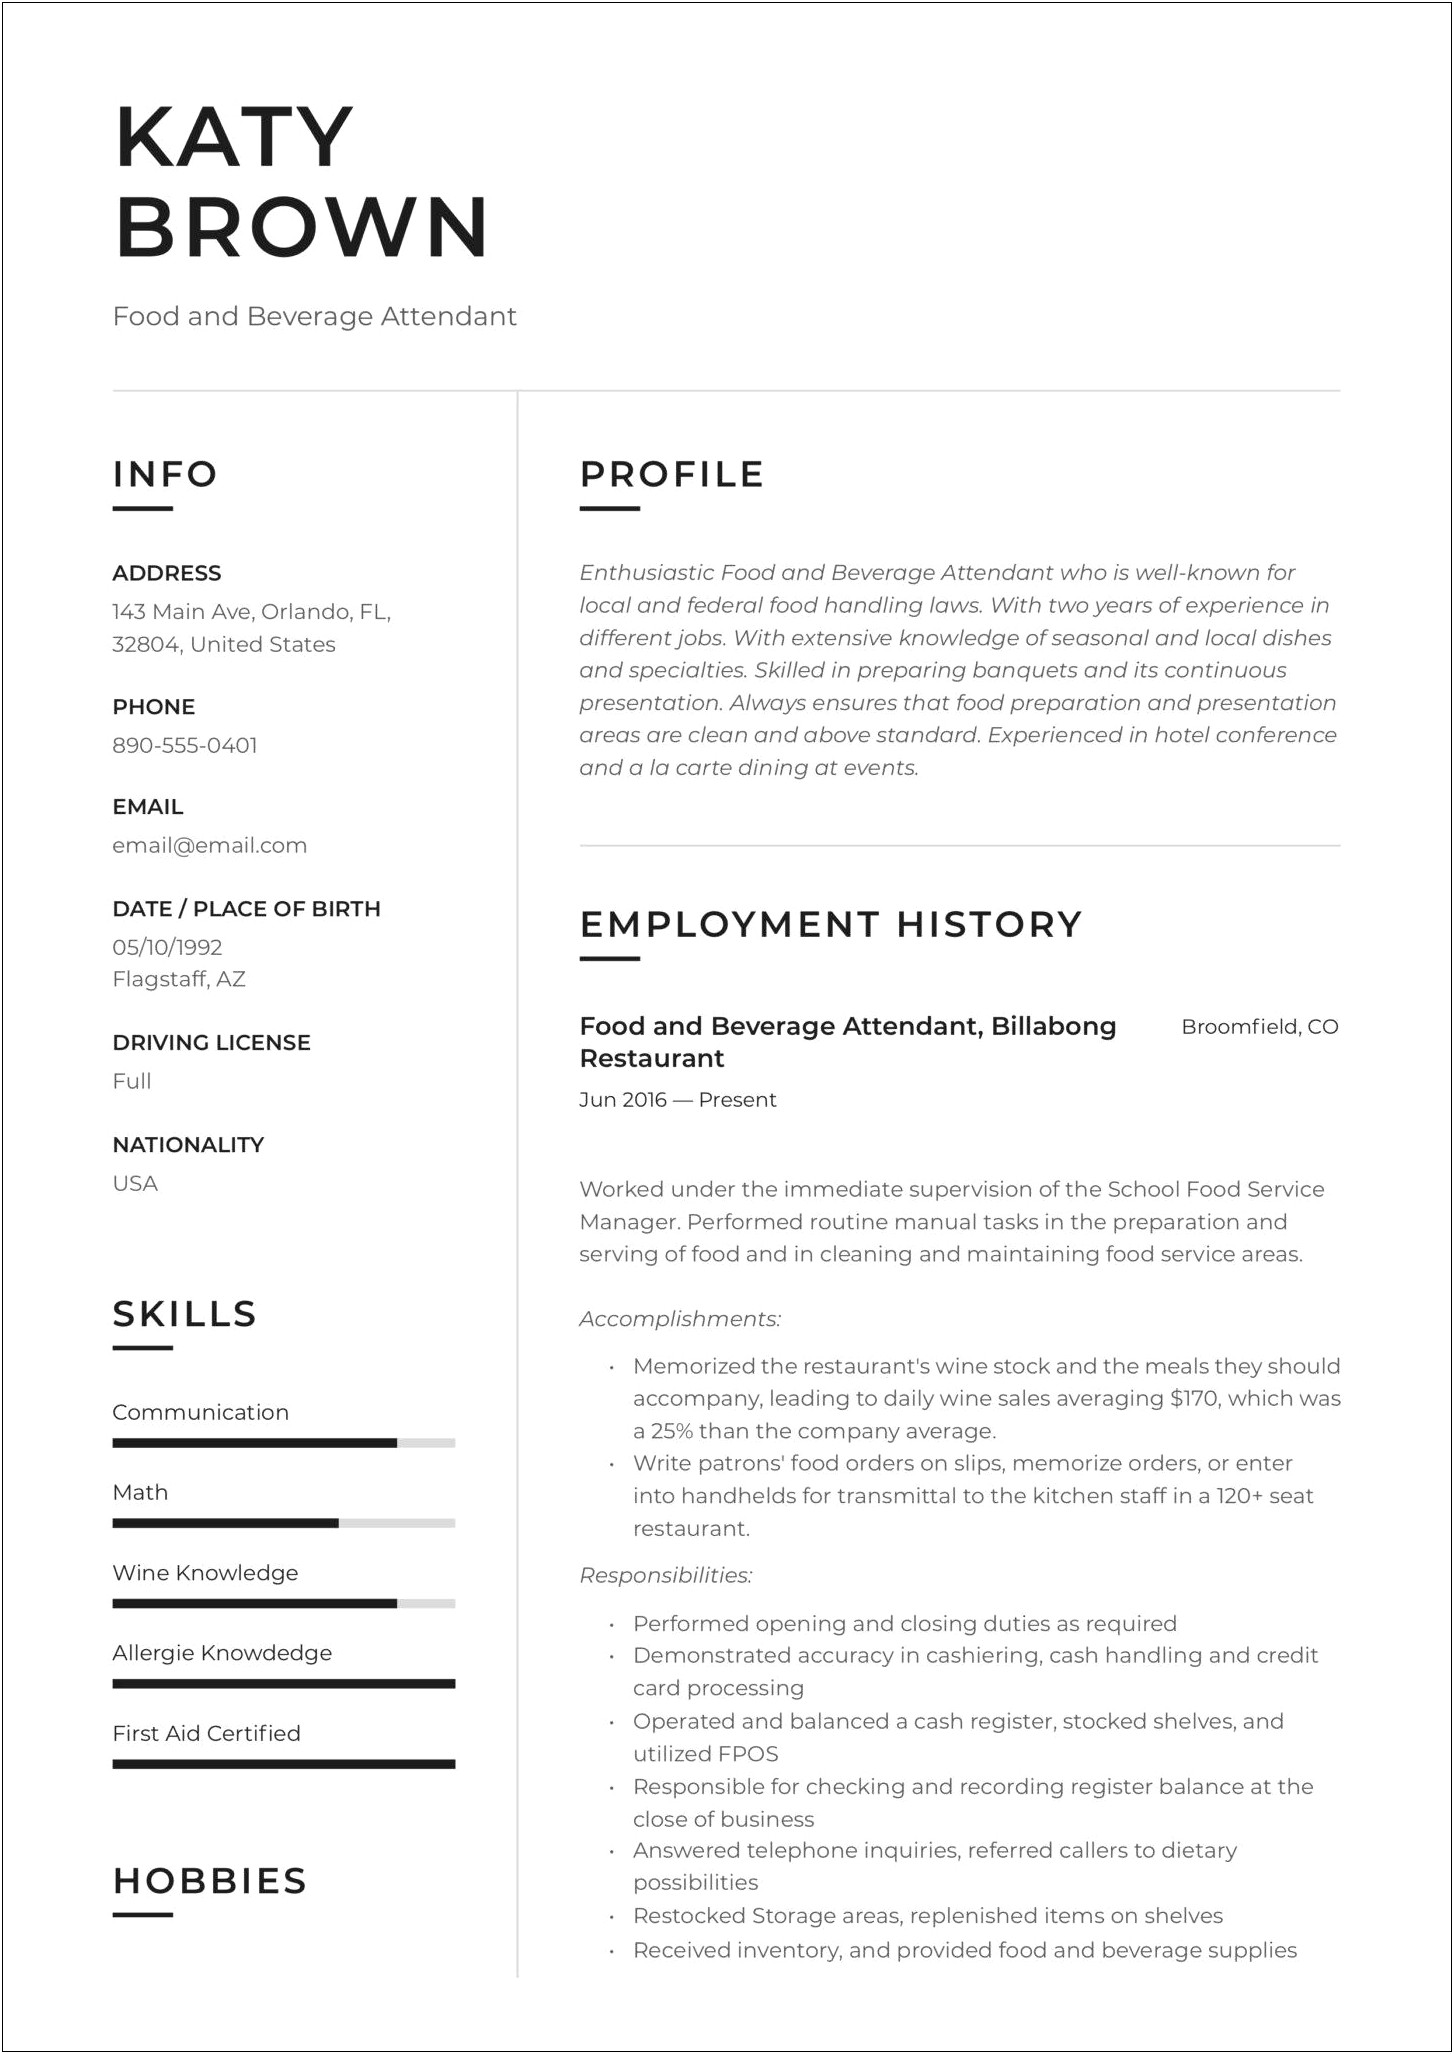 Resume For Hospitality Job With No Experience